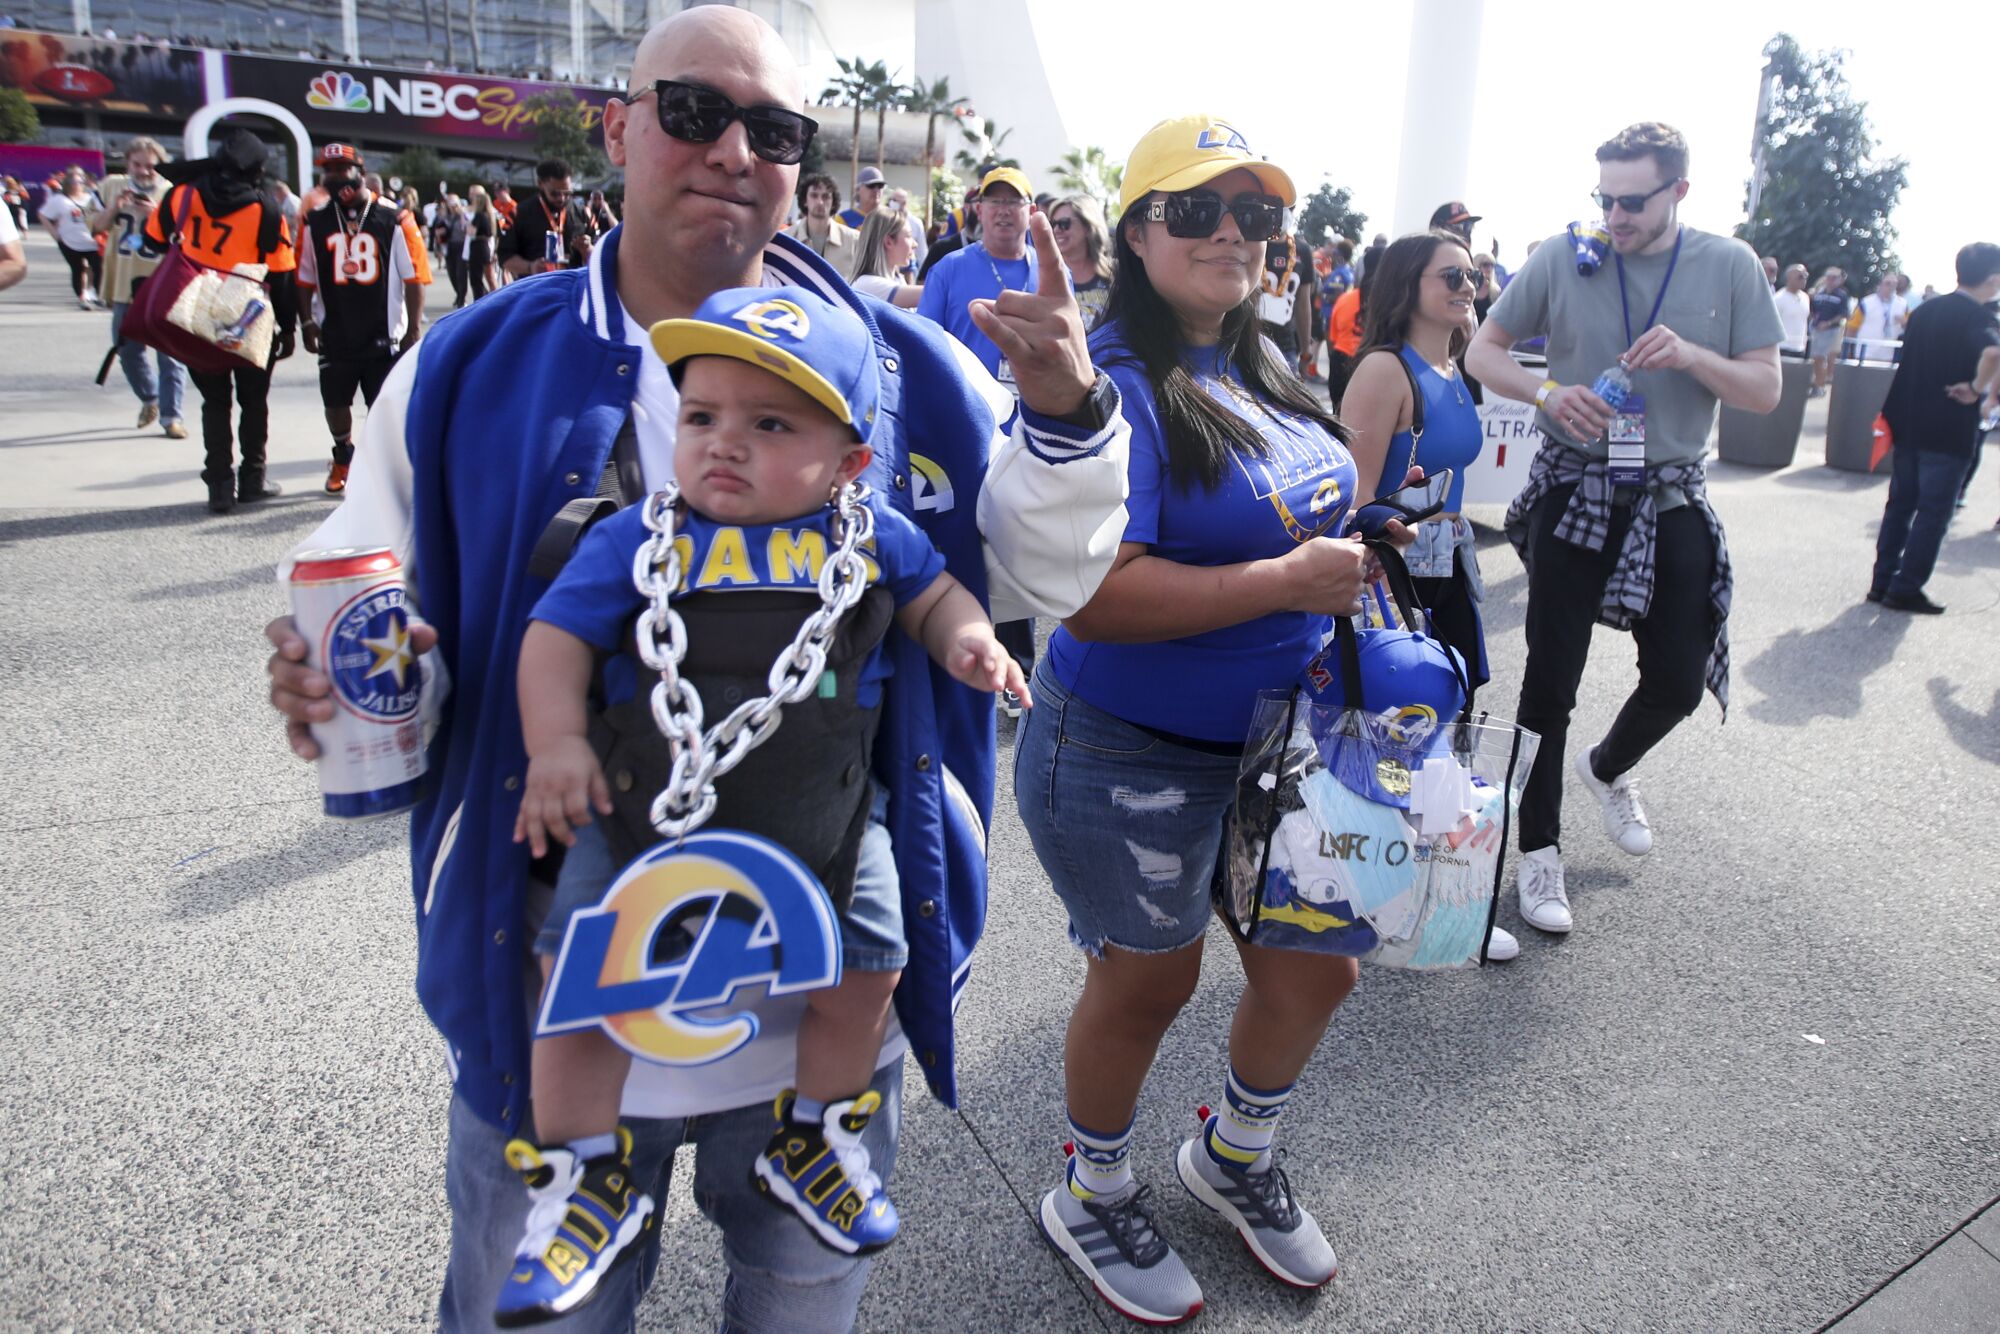 A Rams fan walks with his baby strapped to him outside of SoFi Stadium.